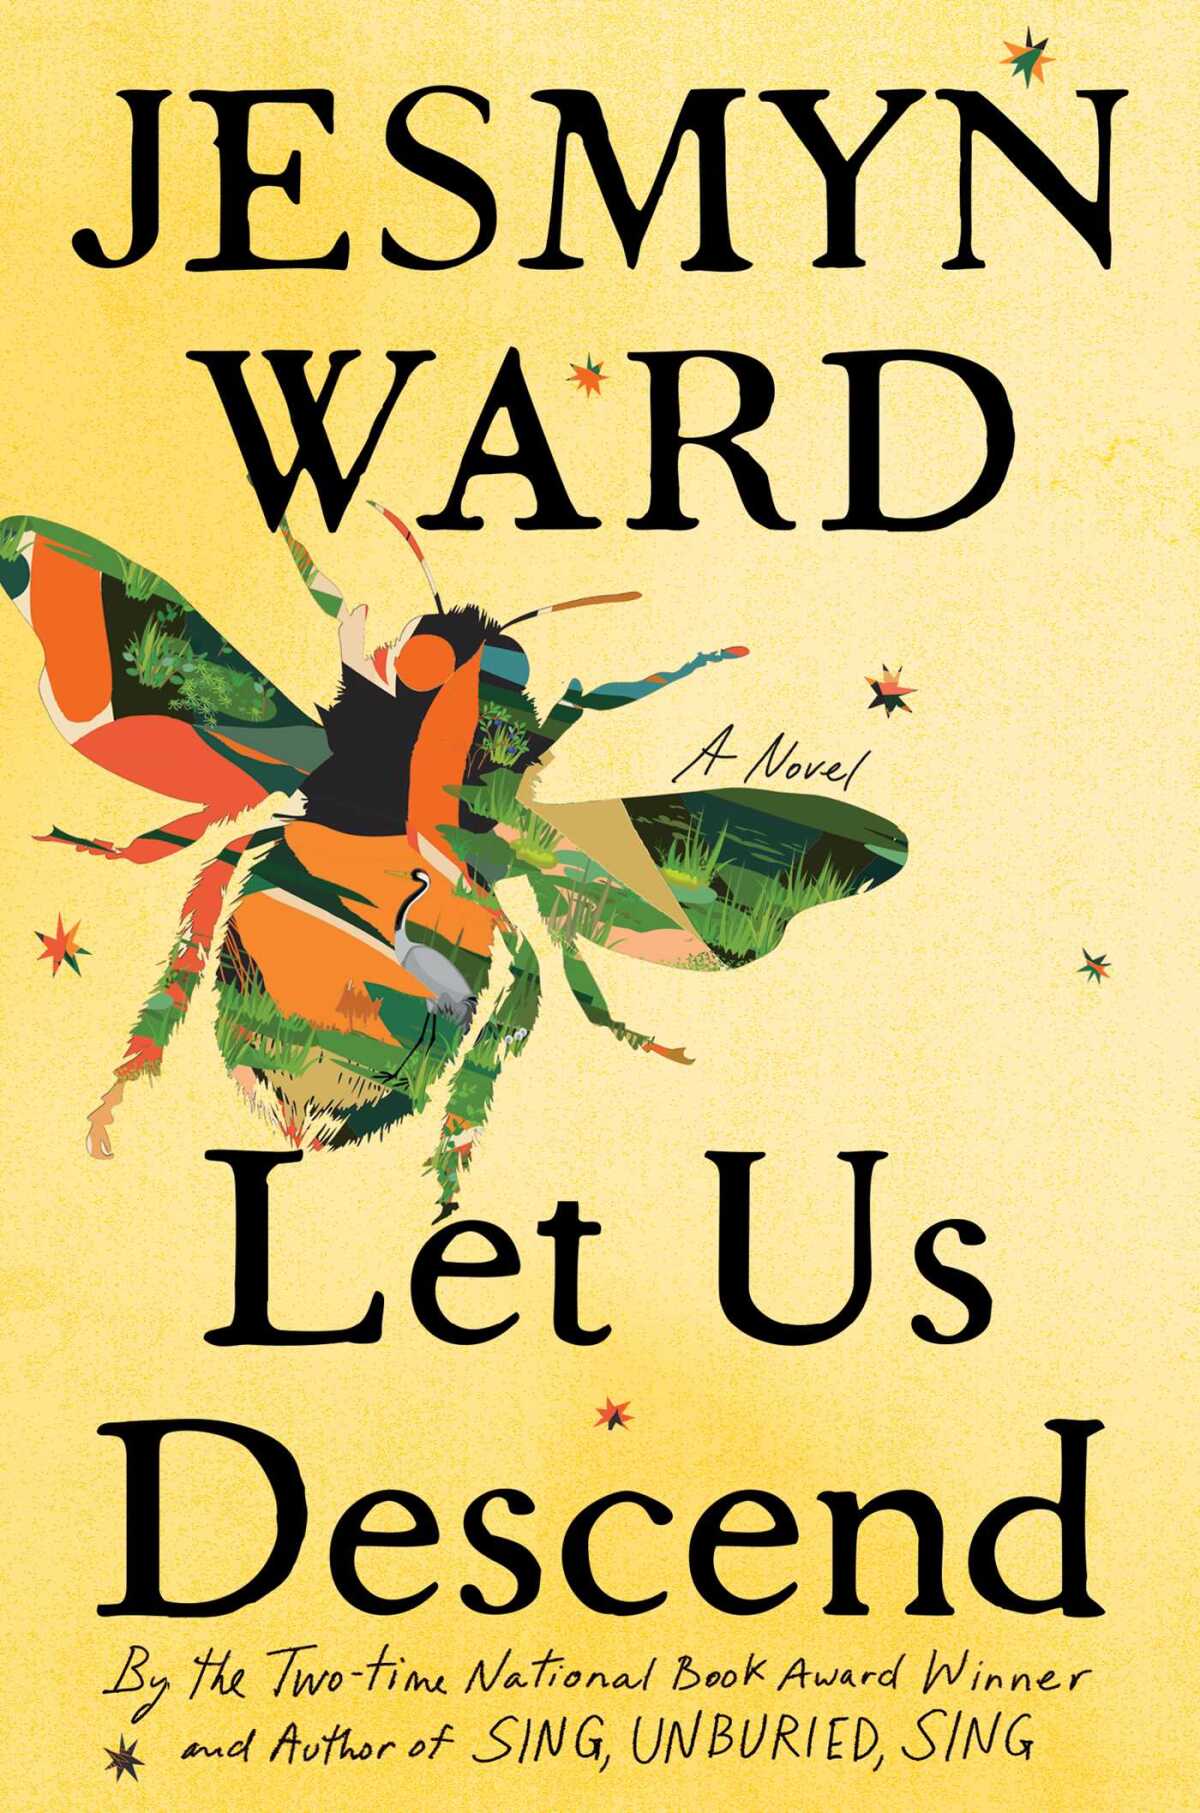 The cover of "Let Us Descend" by Jesmyn Ward features a multicolored illustration of a bee.